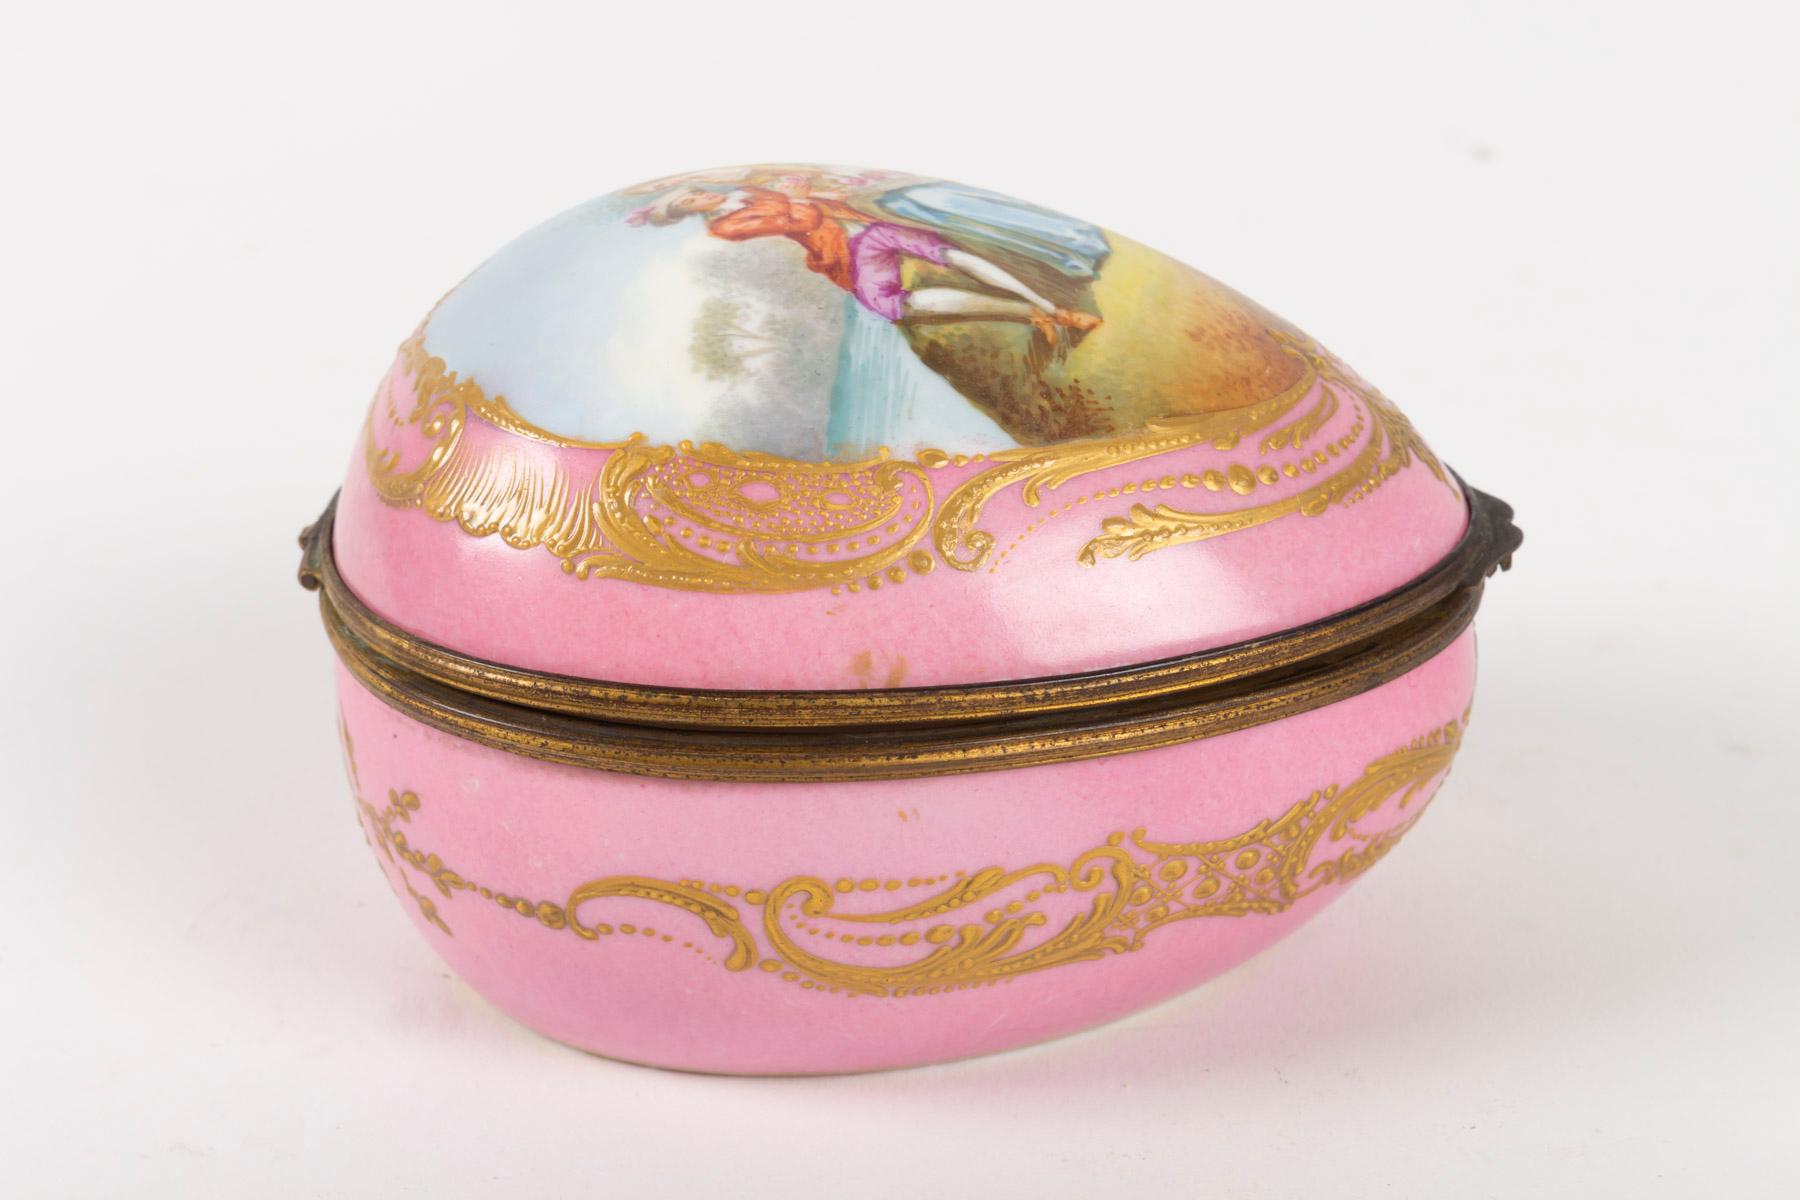 Box, 19th century, Napoleon III period, porcelain and brass mounting, egg, pink, gold decoration and a couple of elegant, interior blans with flower decoration, Sevres brand
Measures: H 8 cm, W 10 cm, P 12 cm.